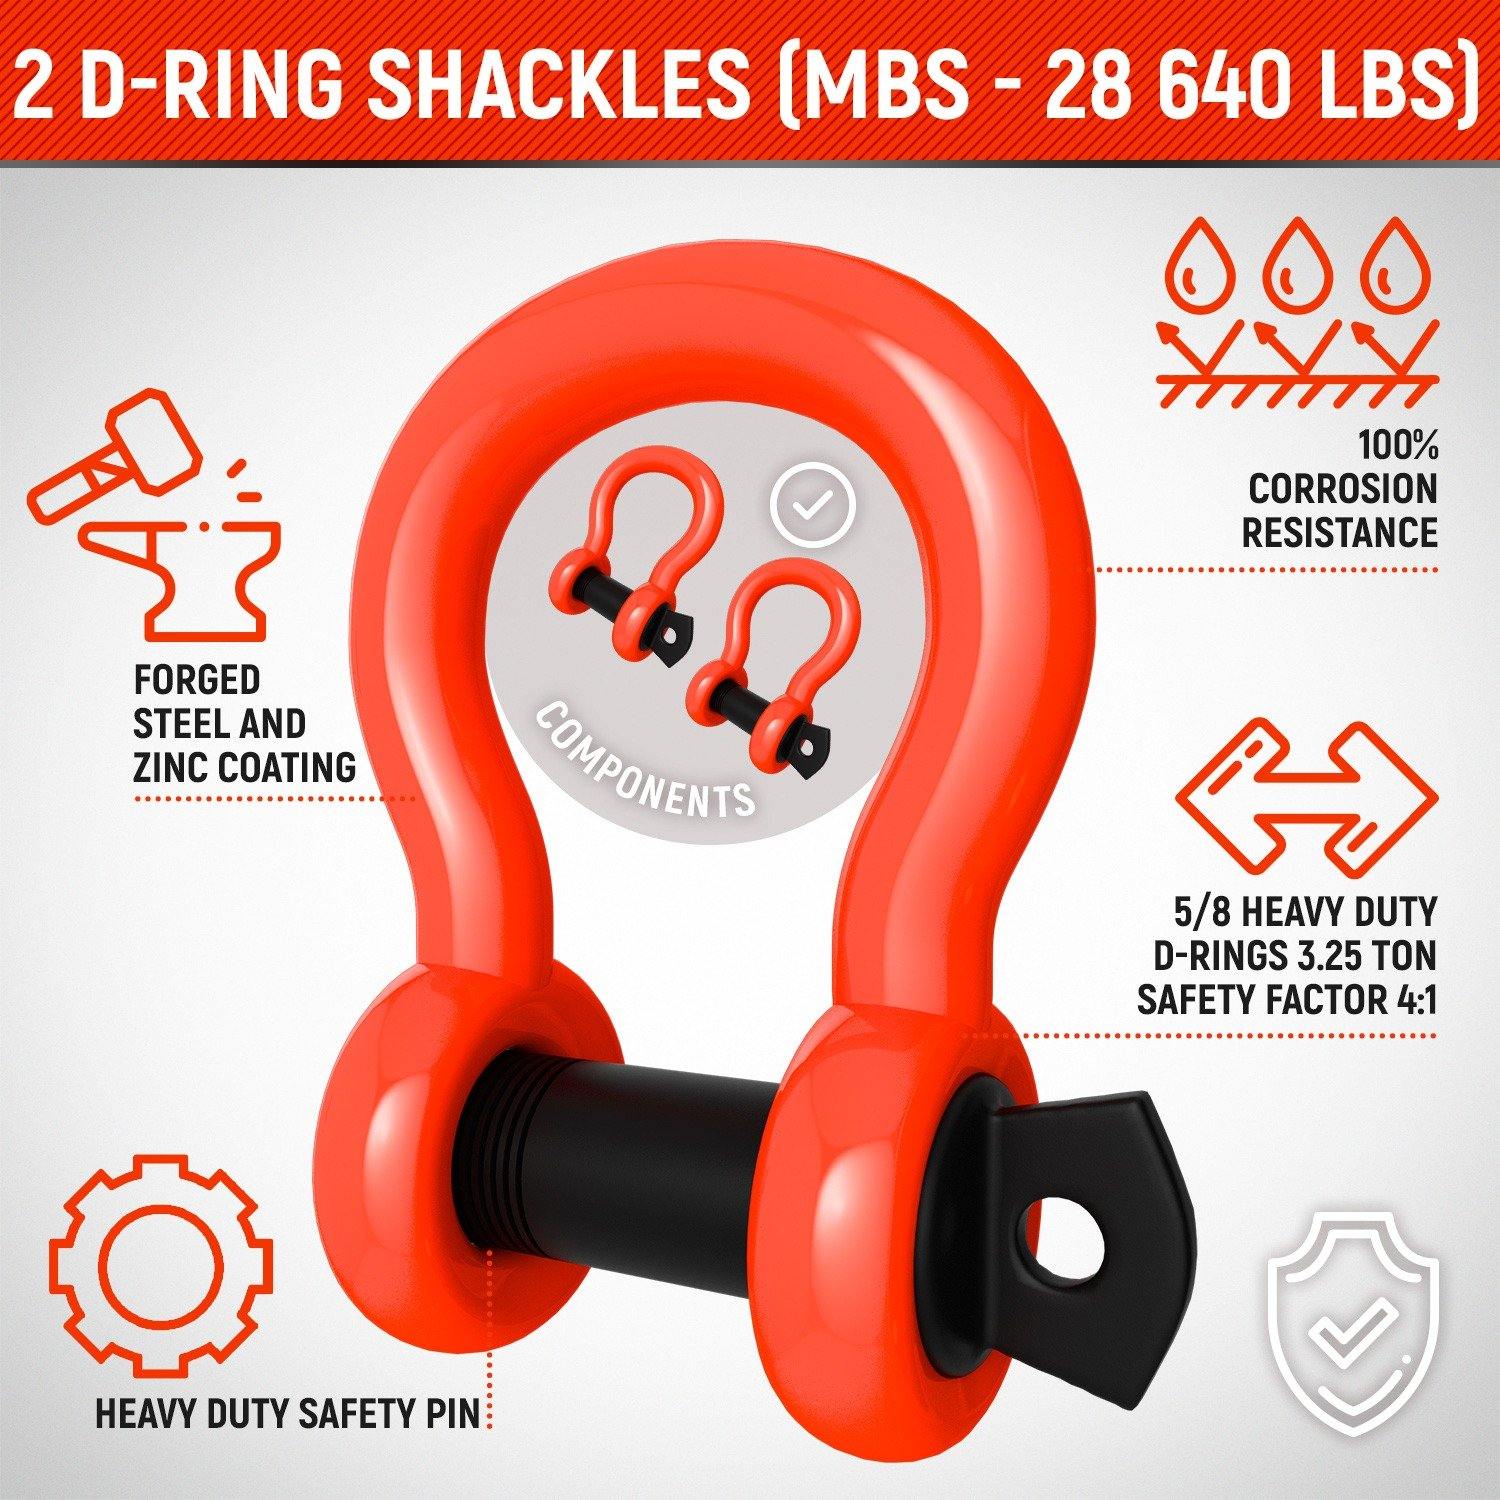 Tow Strap 2”x20’ (20990lb) With Loops and D-Hook Shackles - Miolle